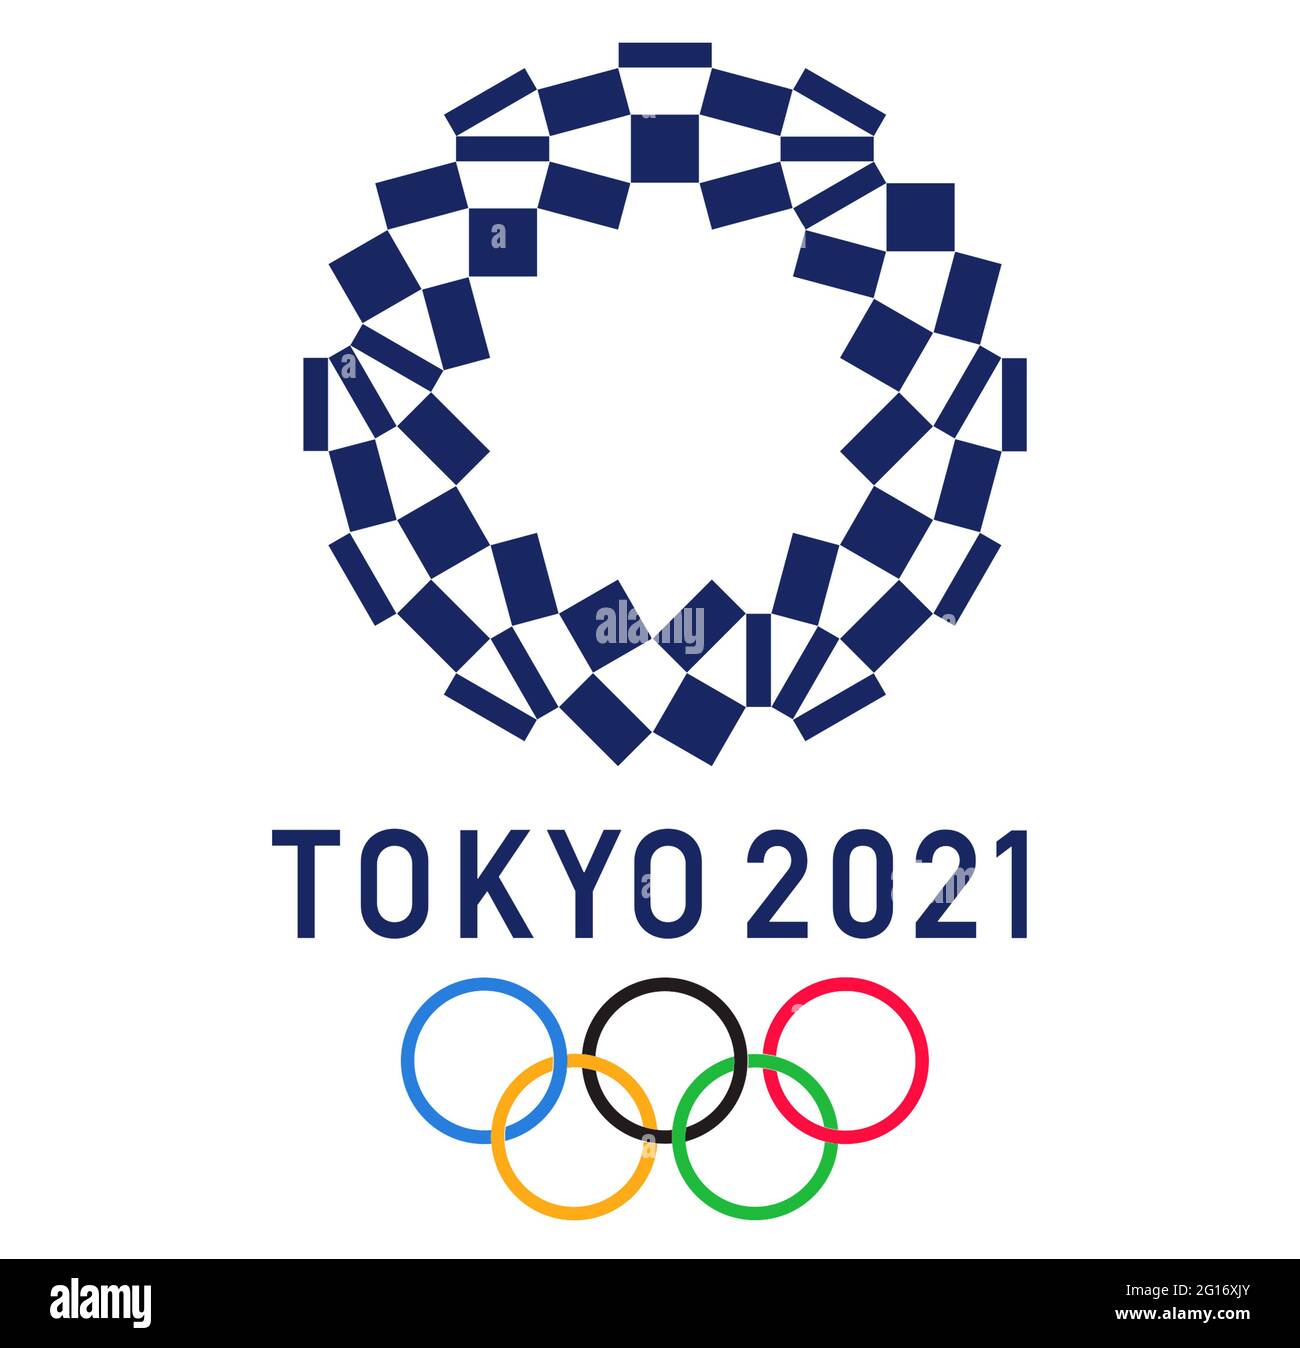 Tokyo 2020 - Olympic Games Stock Photo